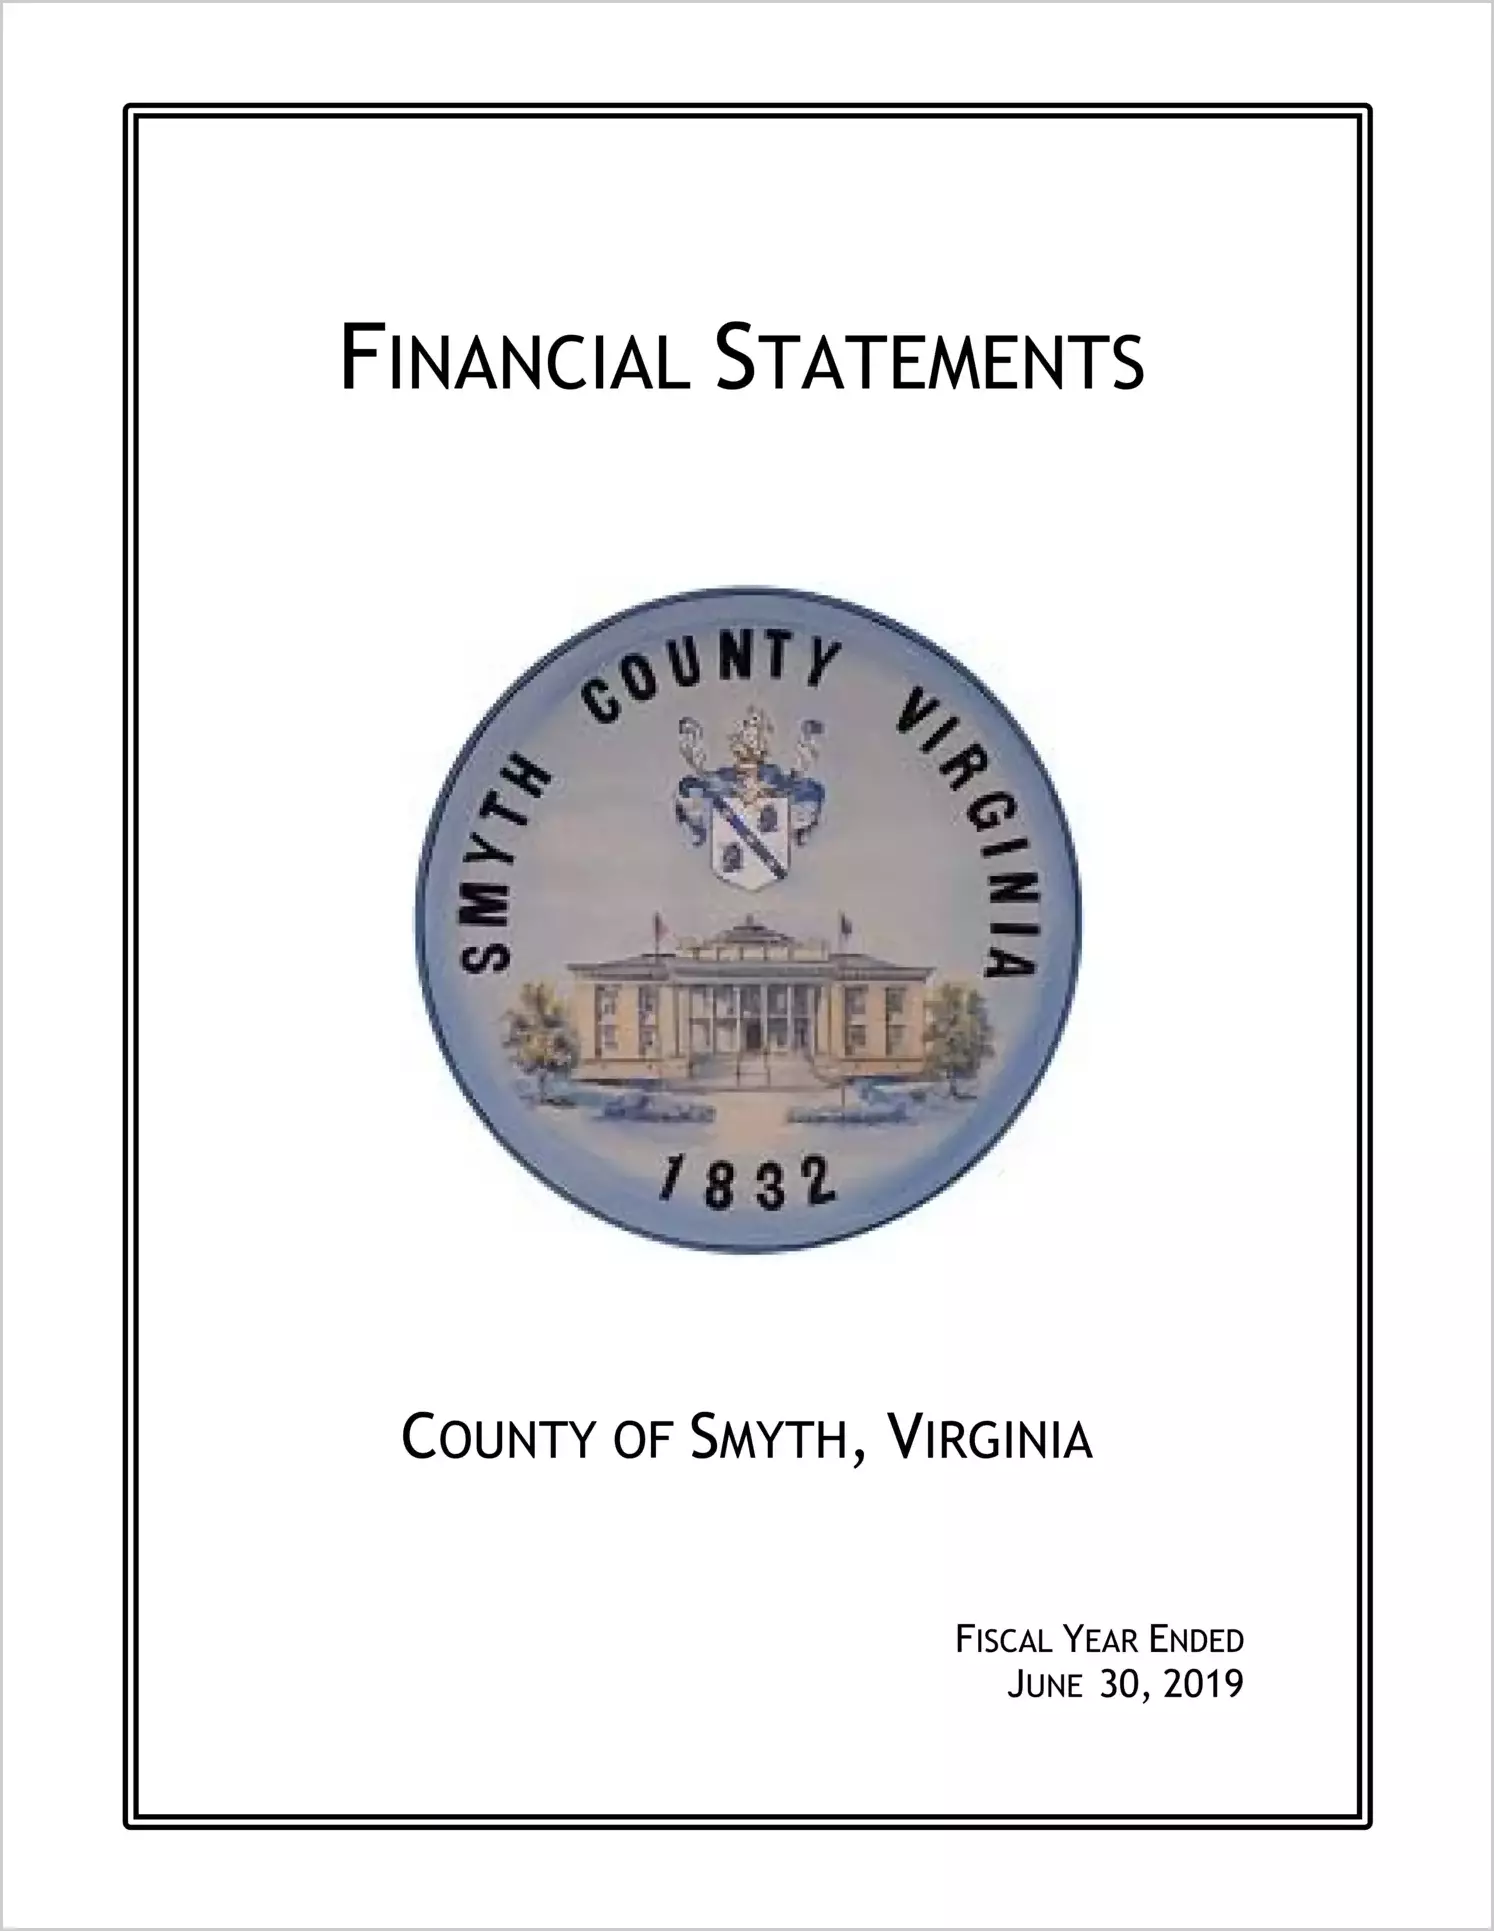 2019 Annual Financial Report for County of Smyth